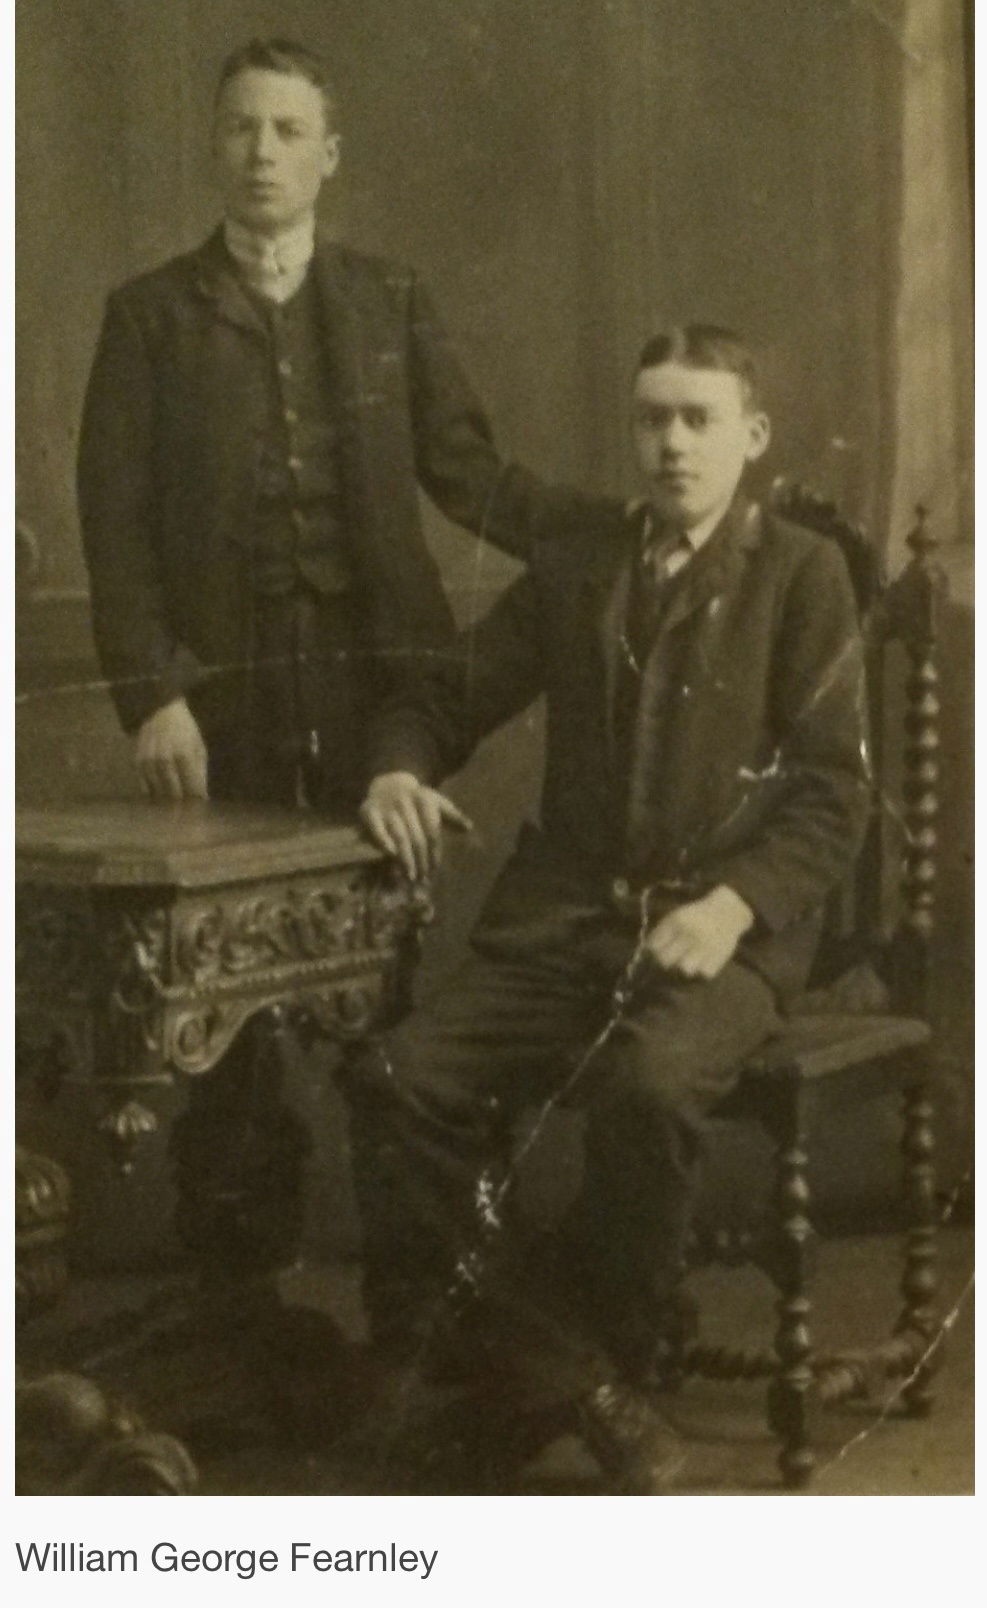 FEARNLEY, Ernest Walter. 1504. Private. KIA 31/07/1917 and his brother Private William George Fearnley, 1503. Civilian photograph of both brothers shown courtesy of https://archives.passchendaele.be/en/soldier/4619.